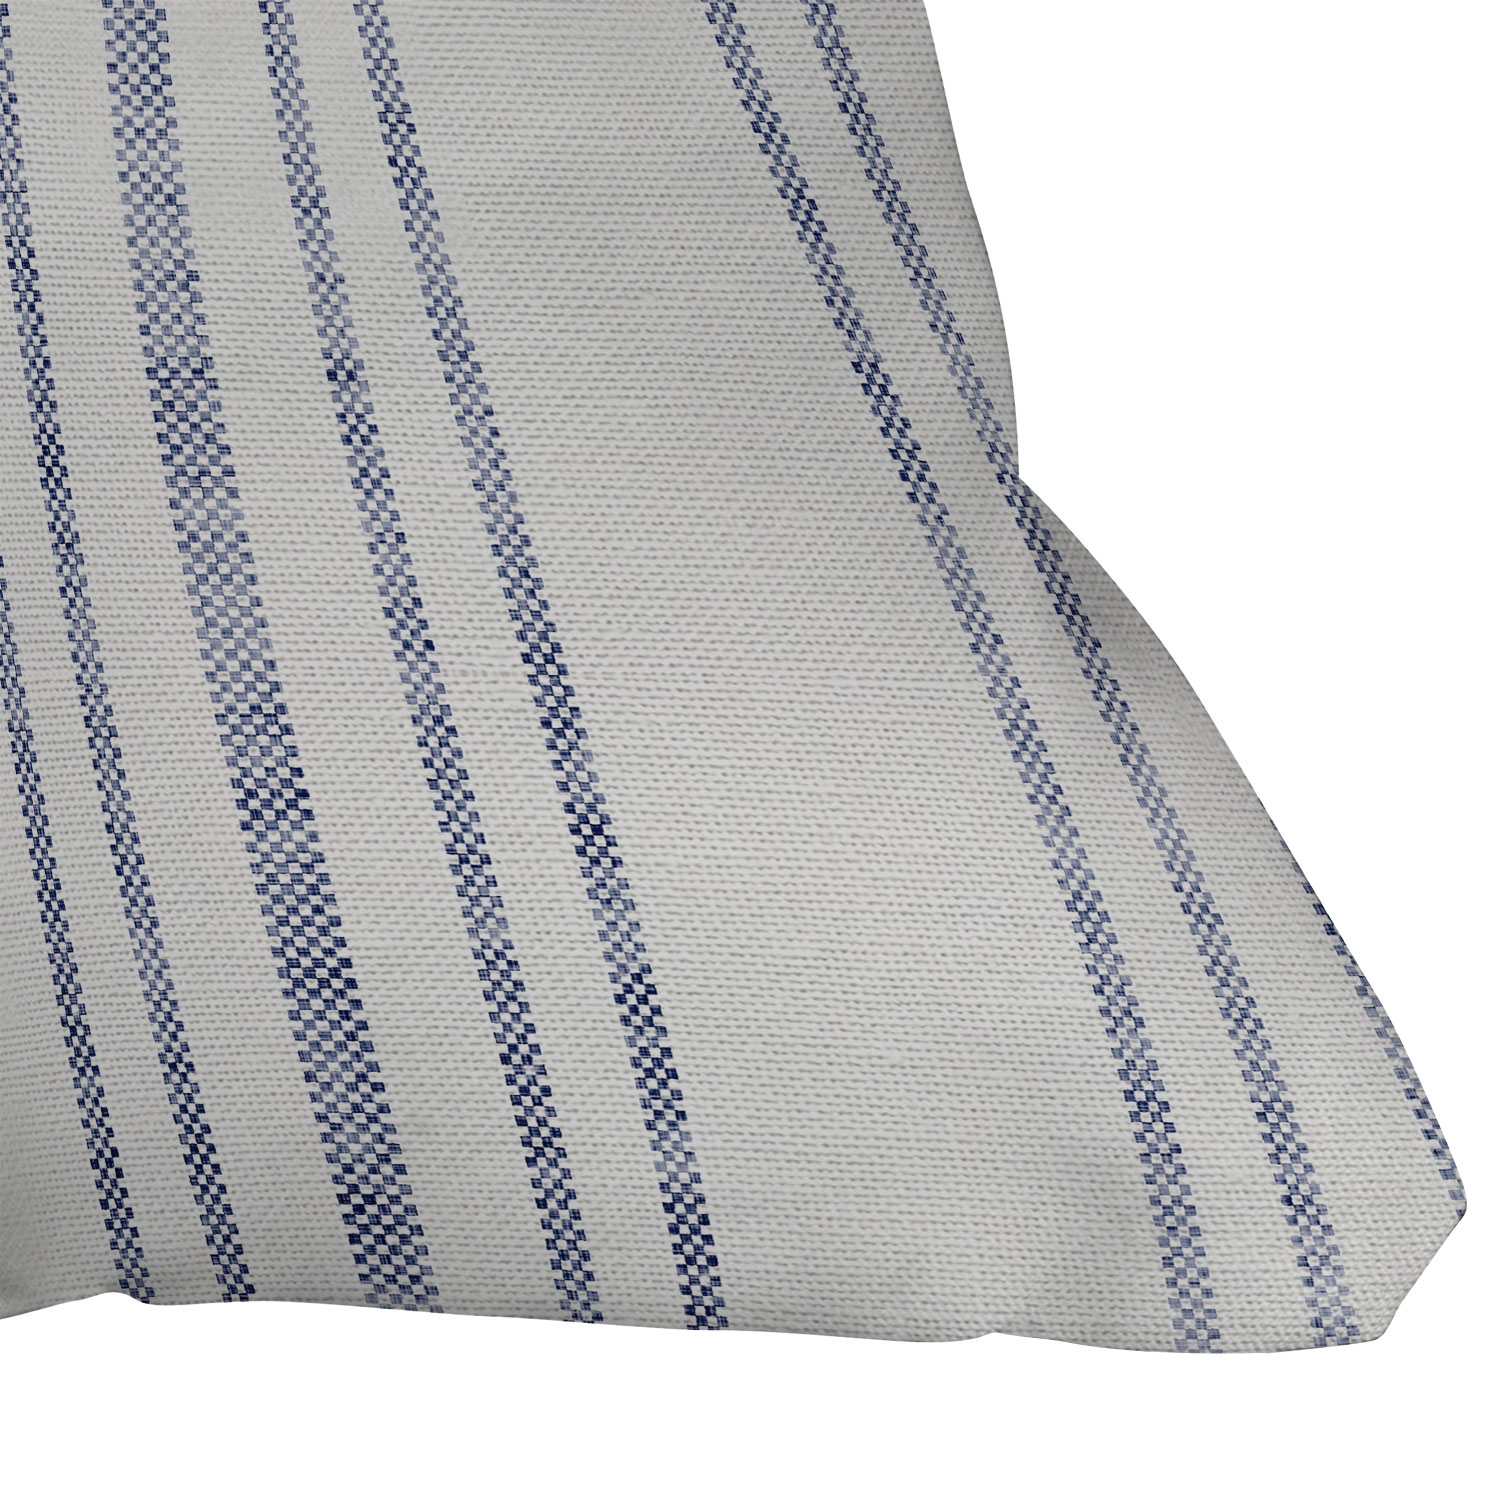 Aegean Multi Stripe by Holli Zollinger - Outdoor Throw Pillow 18" x 18" - Image 2